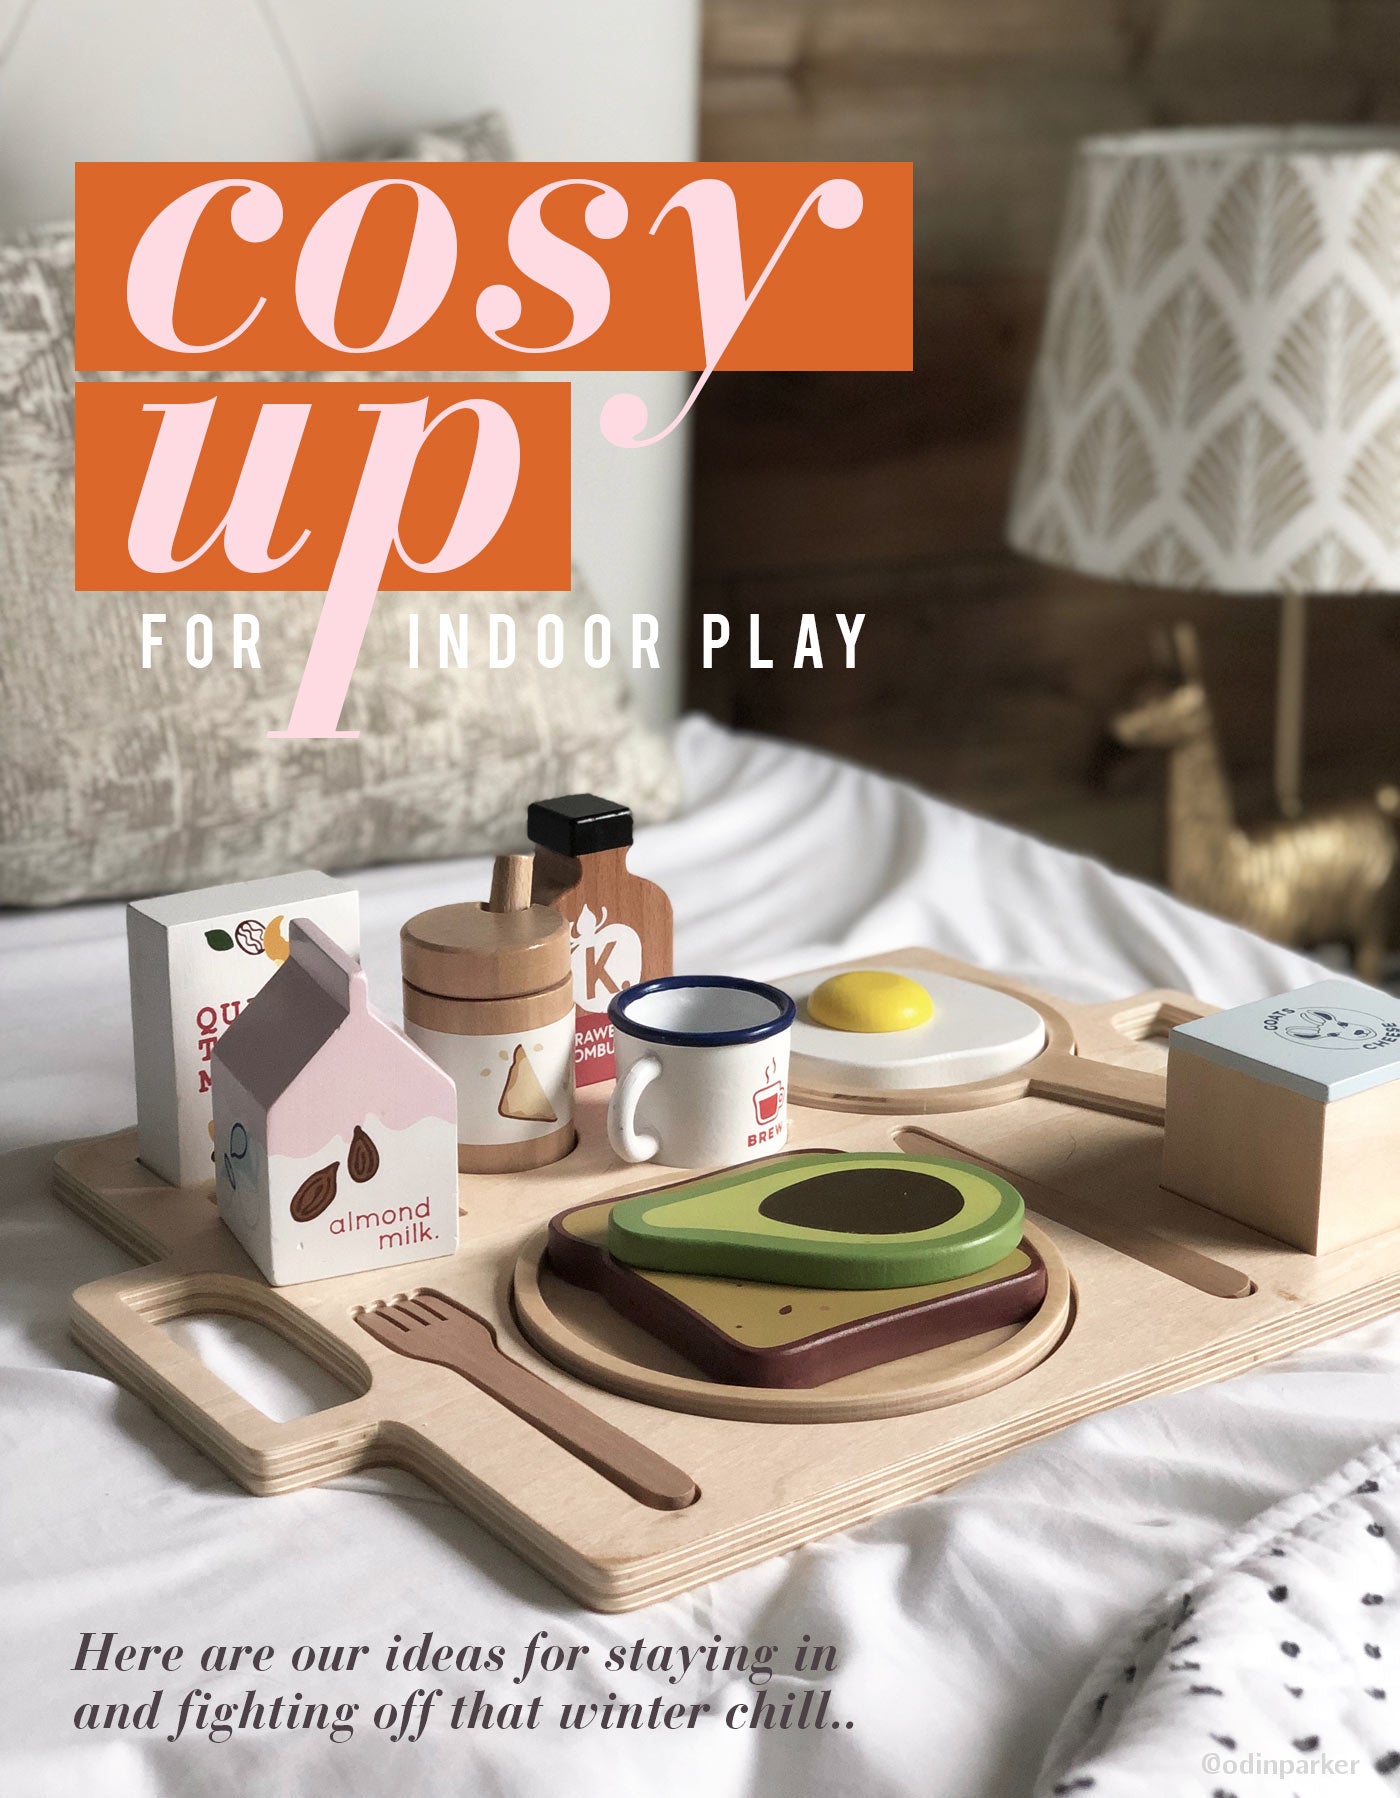 make me iconic wood toys Australian gifts and souvenirs 